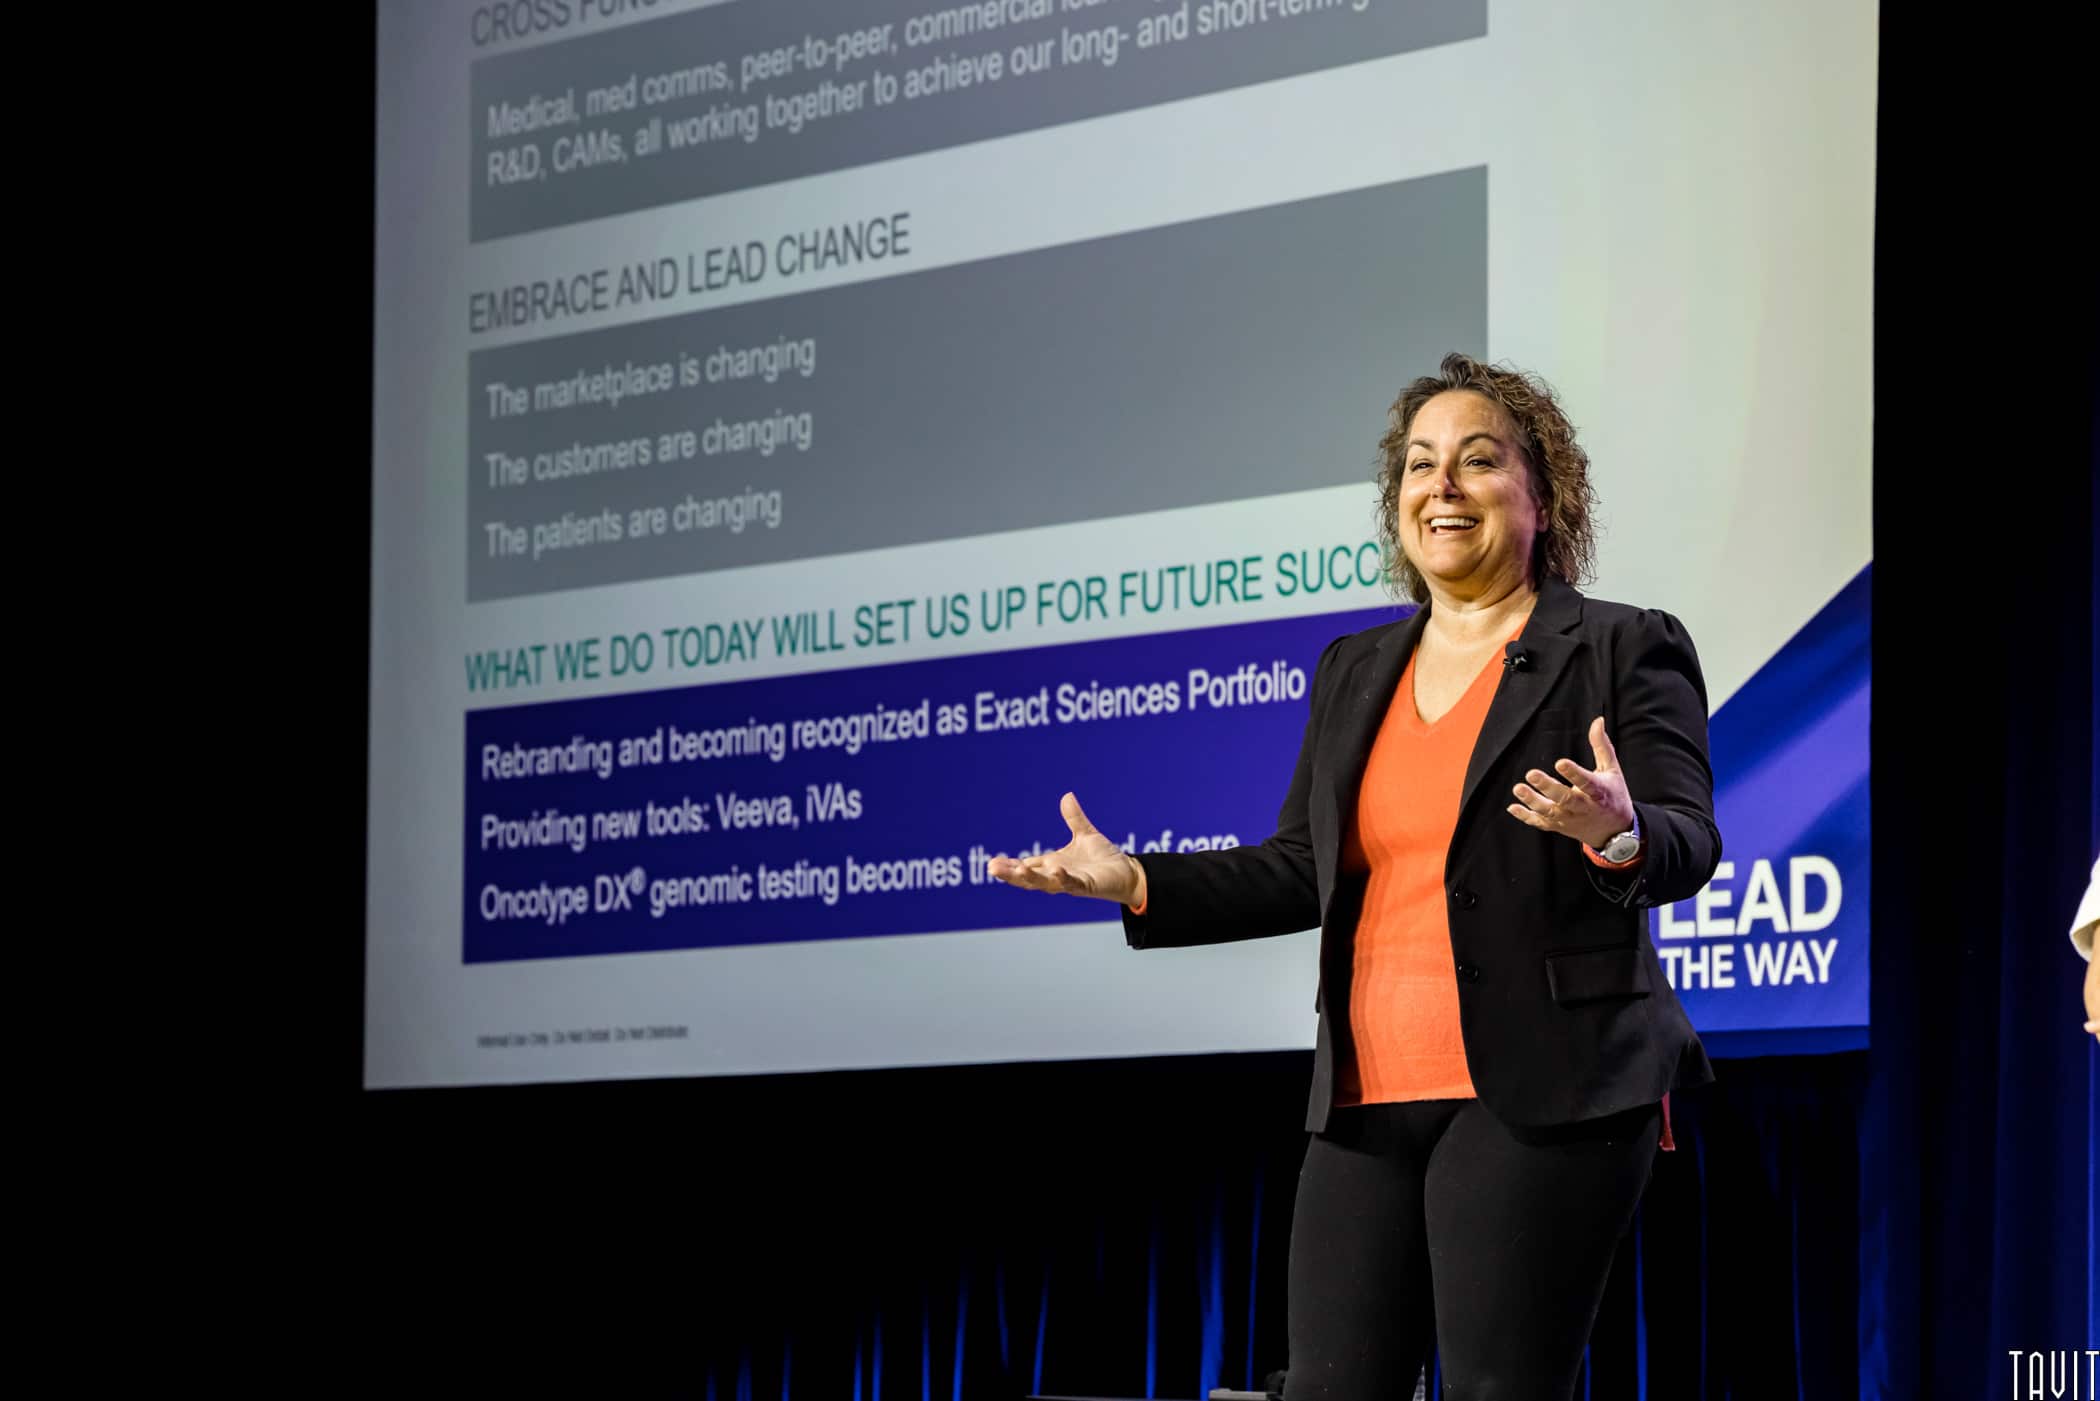 Woman giving presentation on stage for business event